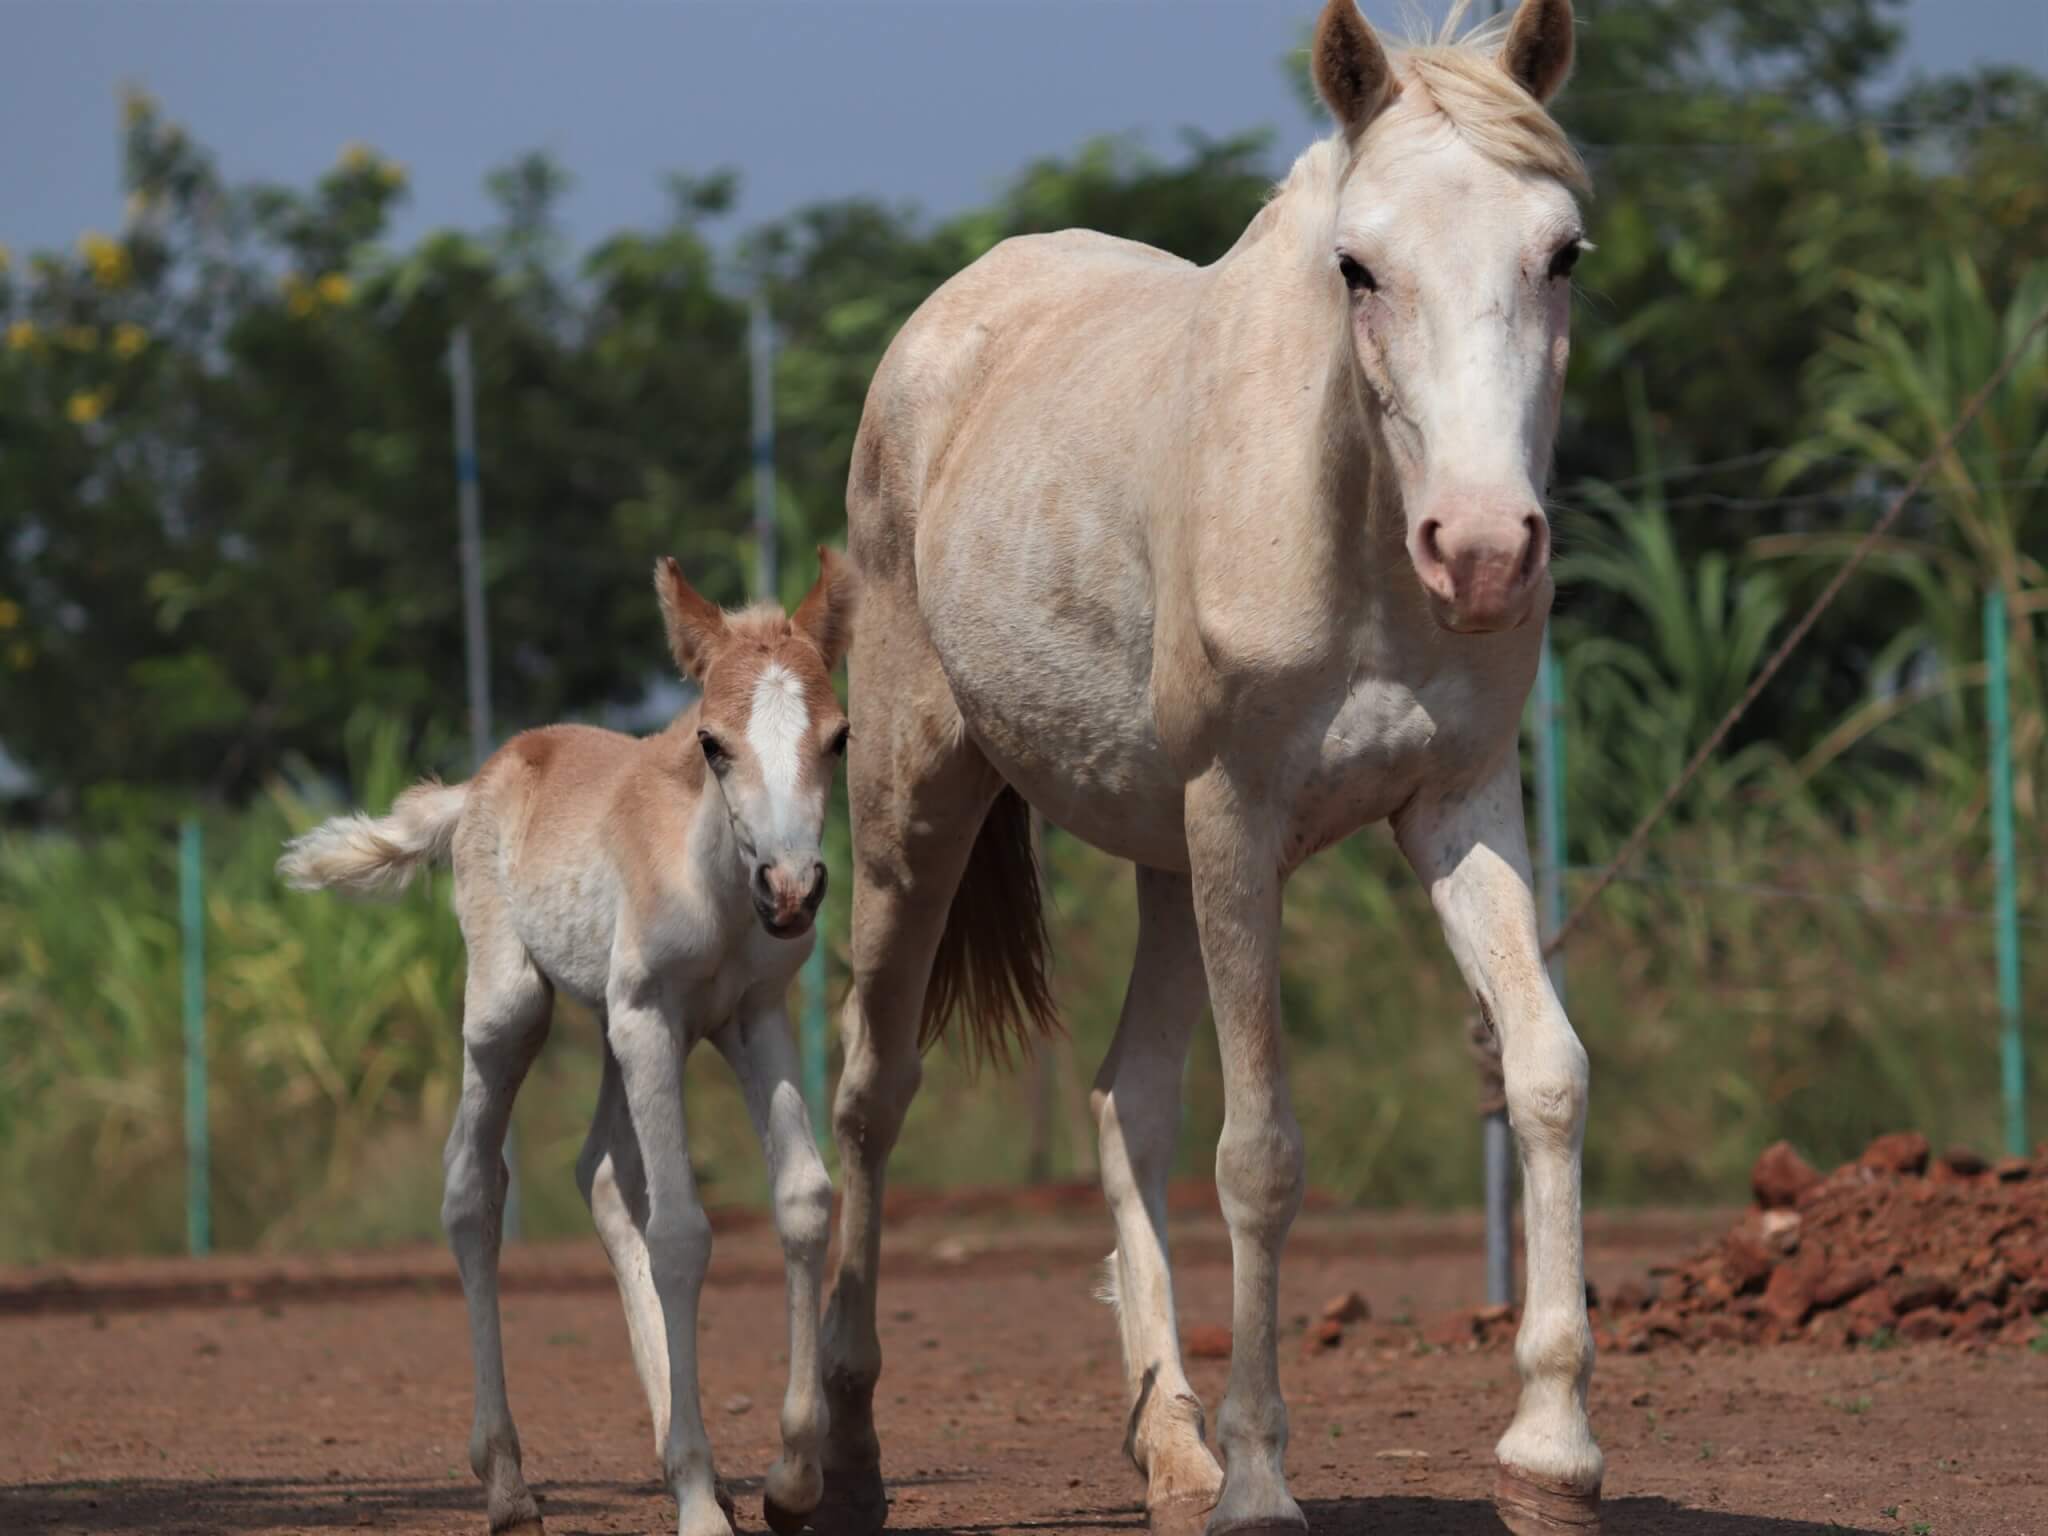 Pony Jaya and her colt, Rudi, stroll around the spacious sanctuary together.